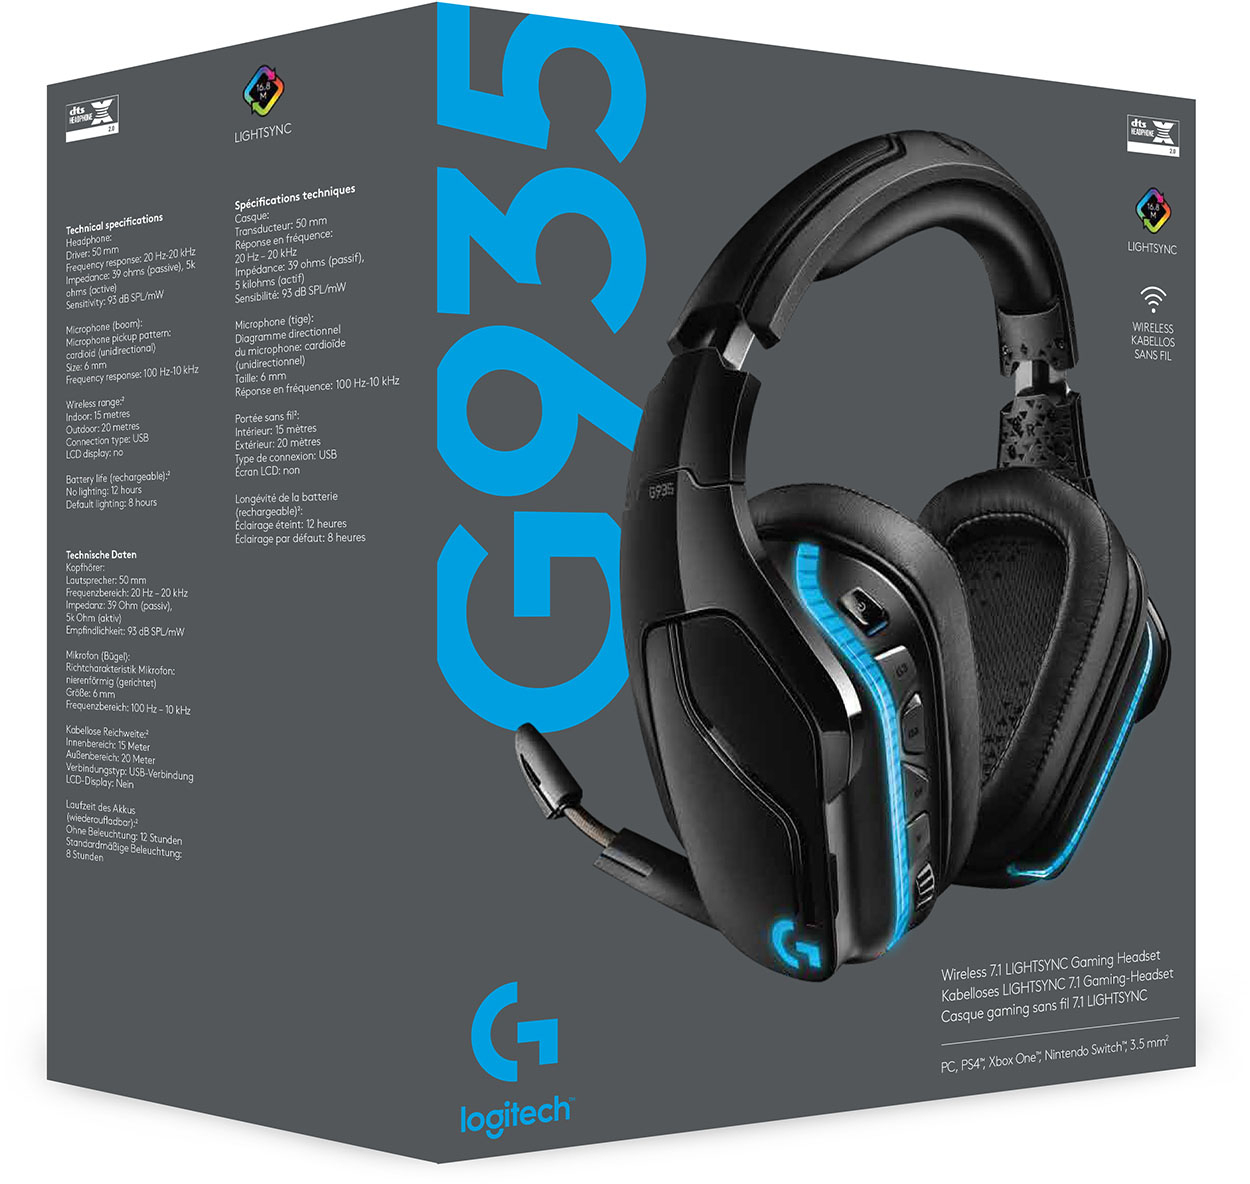 Rechthoek teer Chirurgie Logitech G935 Wireless 7.1 Surround Sound Over-the-Ear Gaming Headset for  PC with LIGHTSYNC RGB Lighting Black/Blue 981-000742 - Best Buy